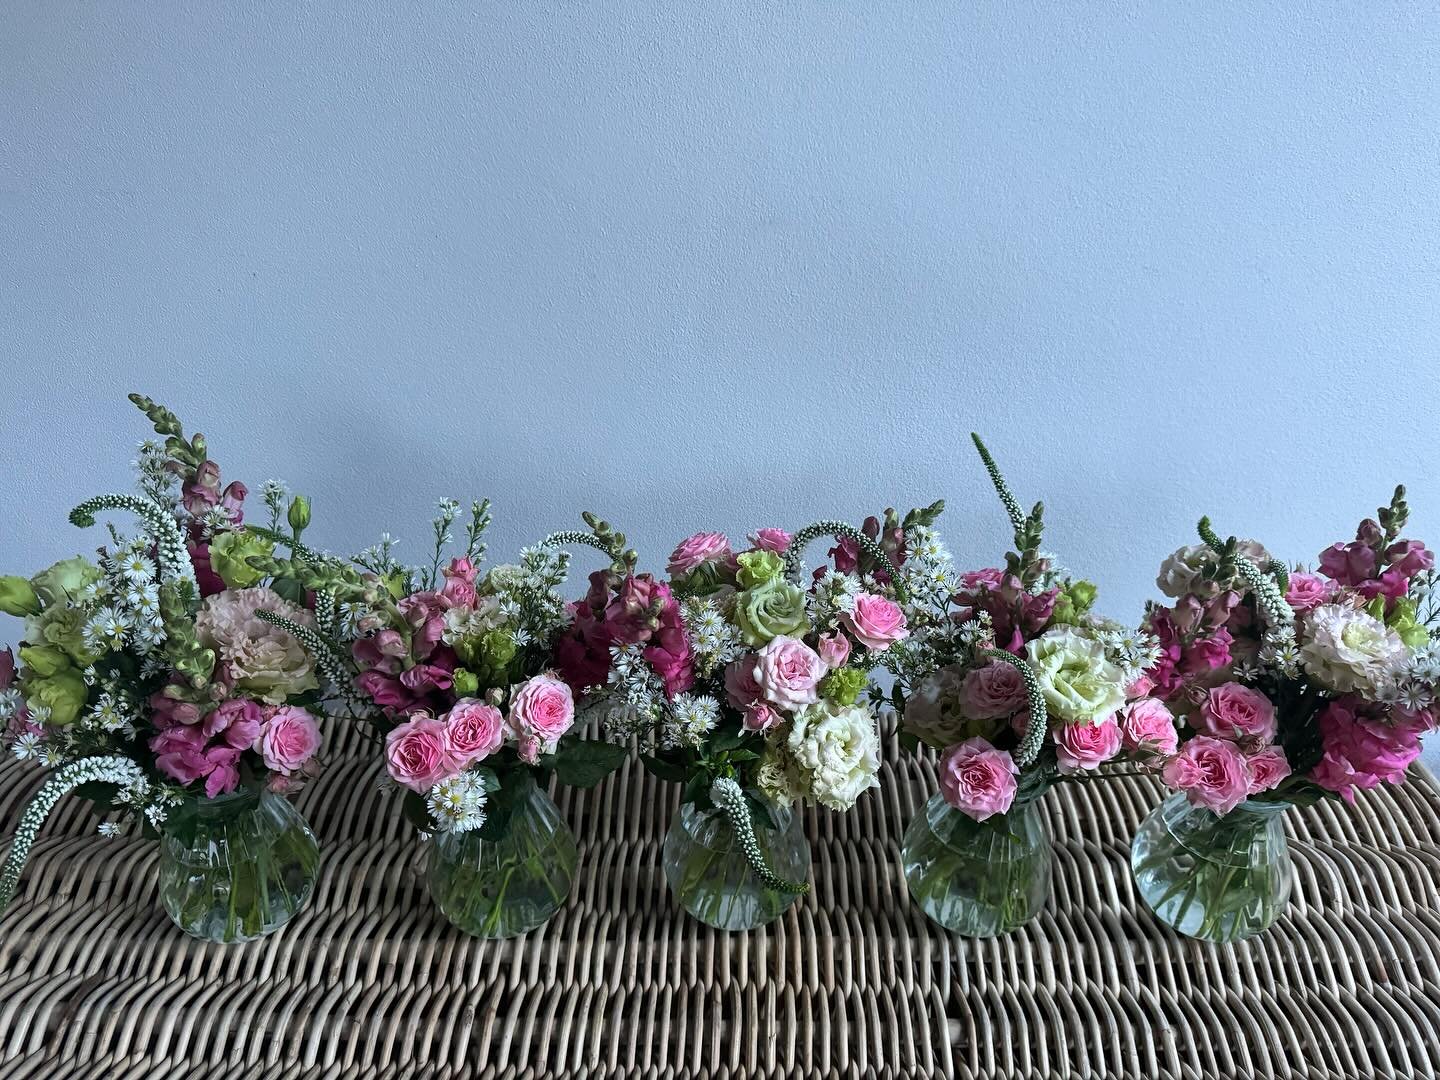 5 little posies stand in row - you can now order these perfect table decorations for your next dinner party or special occasion. These were for an 80th. Let us know your colour scheme. #flowers #floralstudio #giftbouquet #tabledecoration #80thbirthda